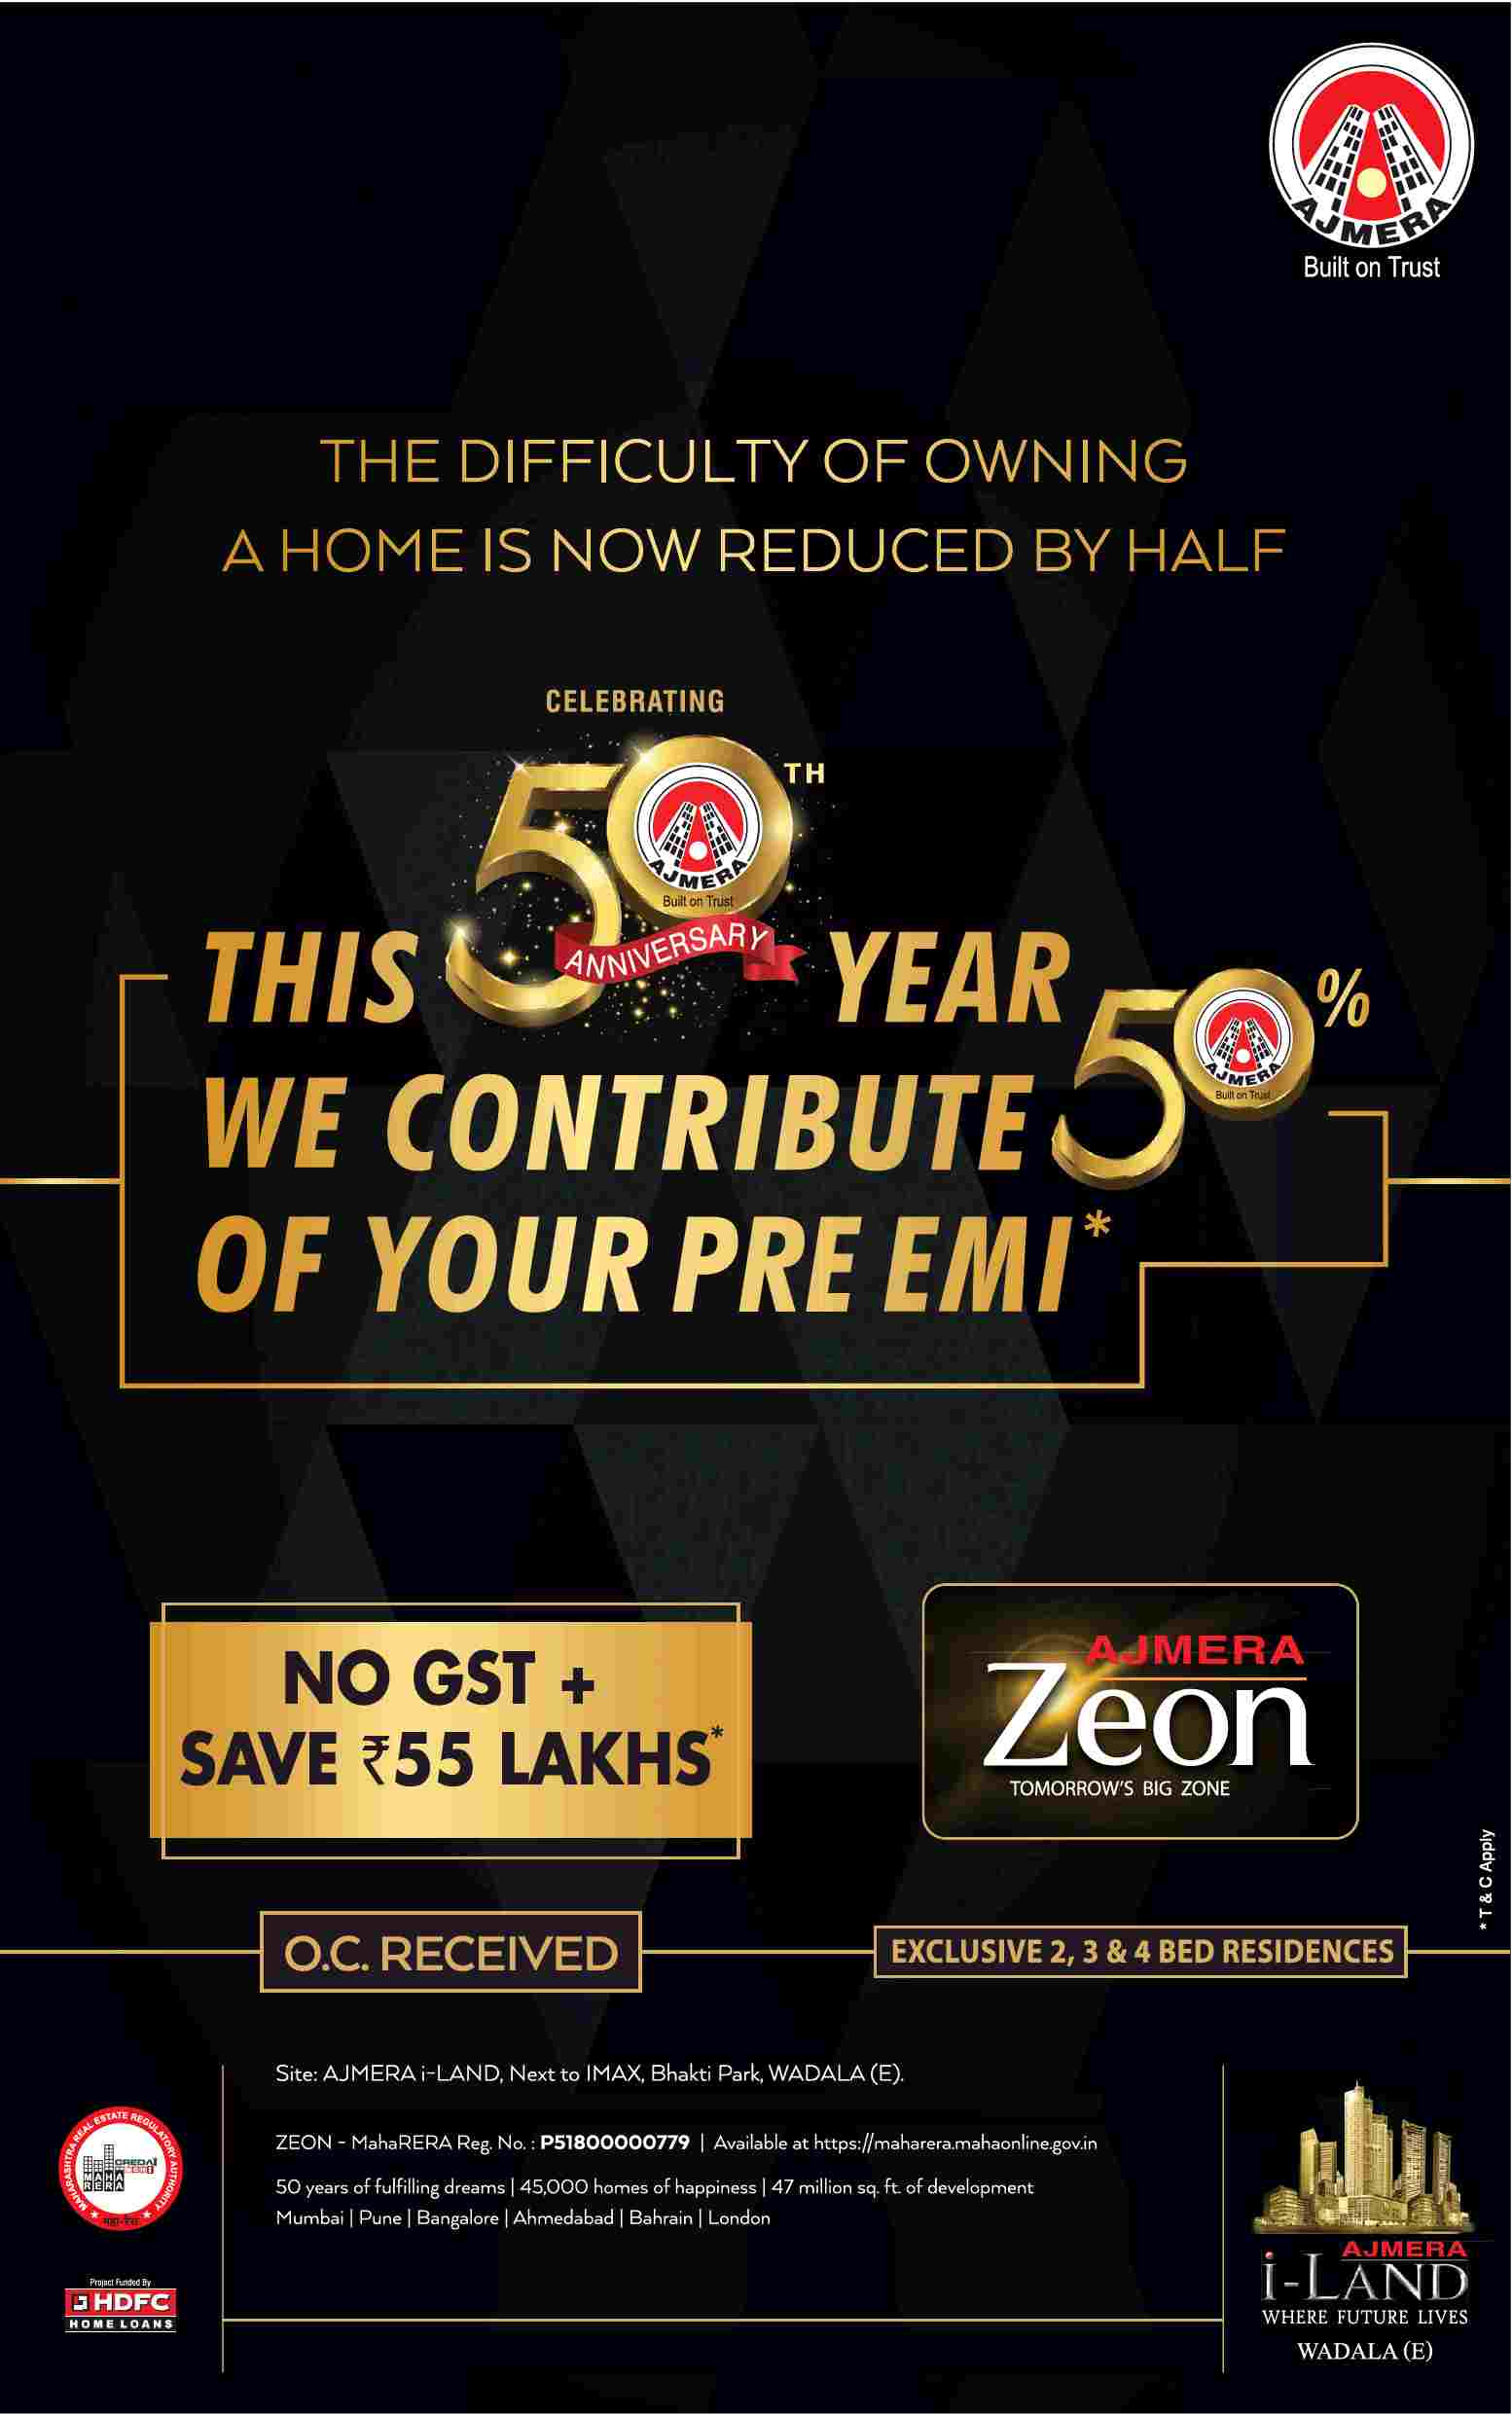 Now save Rs. 55 Lakhs & pay no GST by booking home at Ajmera Zeon in Mumbai Update